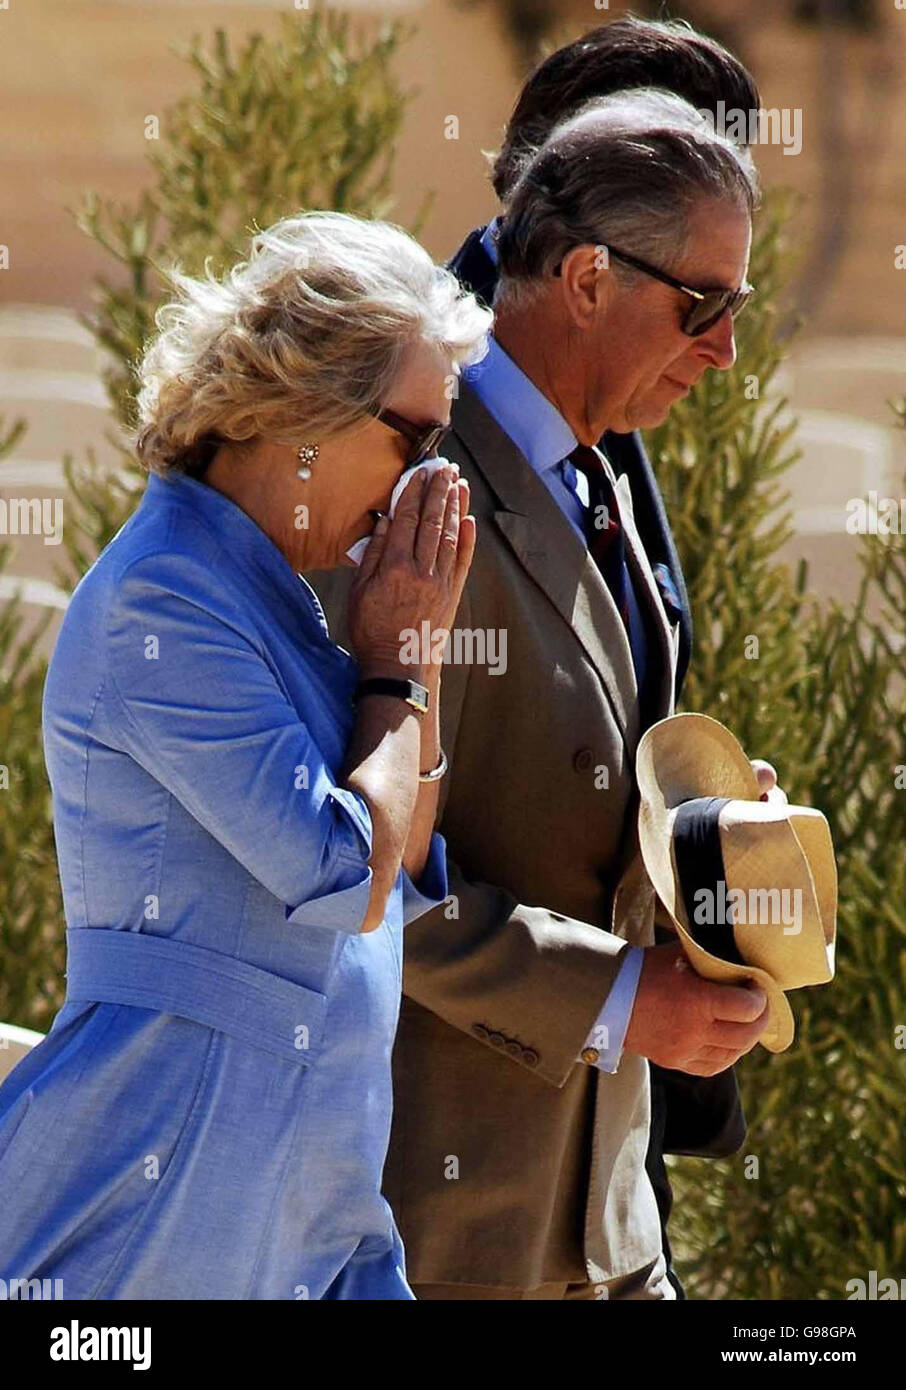 *Recrop of ROYAL Charles 1* The Prince of Wales and Duchess of Cornwall amongst the gravestones in the Commonwealth War Graves Cemetery in El Alamein, Egypt, Friday March 24, 2006. The Duchess of Cornwall paid tribute today to her father's comrades who died in front of him in the aftermath of the Battle of El Alamein. Major Bruce Shand, now 89, survived the attack in November 1942, but saw his wireless operator Sergeant Charles Francis and driver Corporal Edward Plant who were travelling in the same vehicle as him, perish. Today at the cemetery in El Alamein Camilla gently placed a bunch of Stock Photo